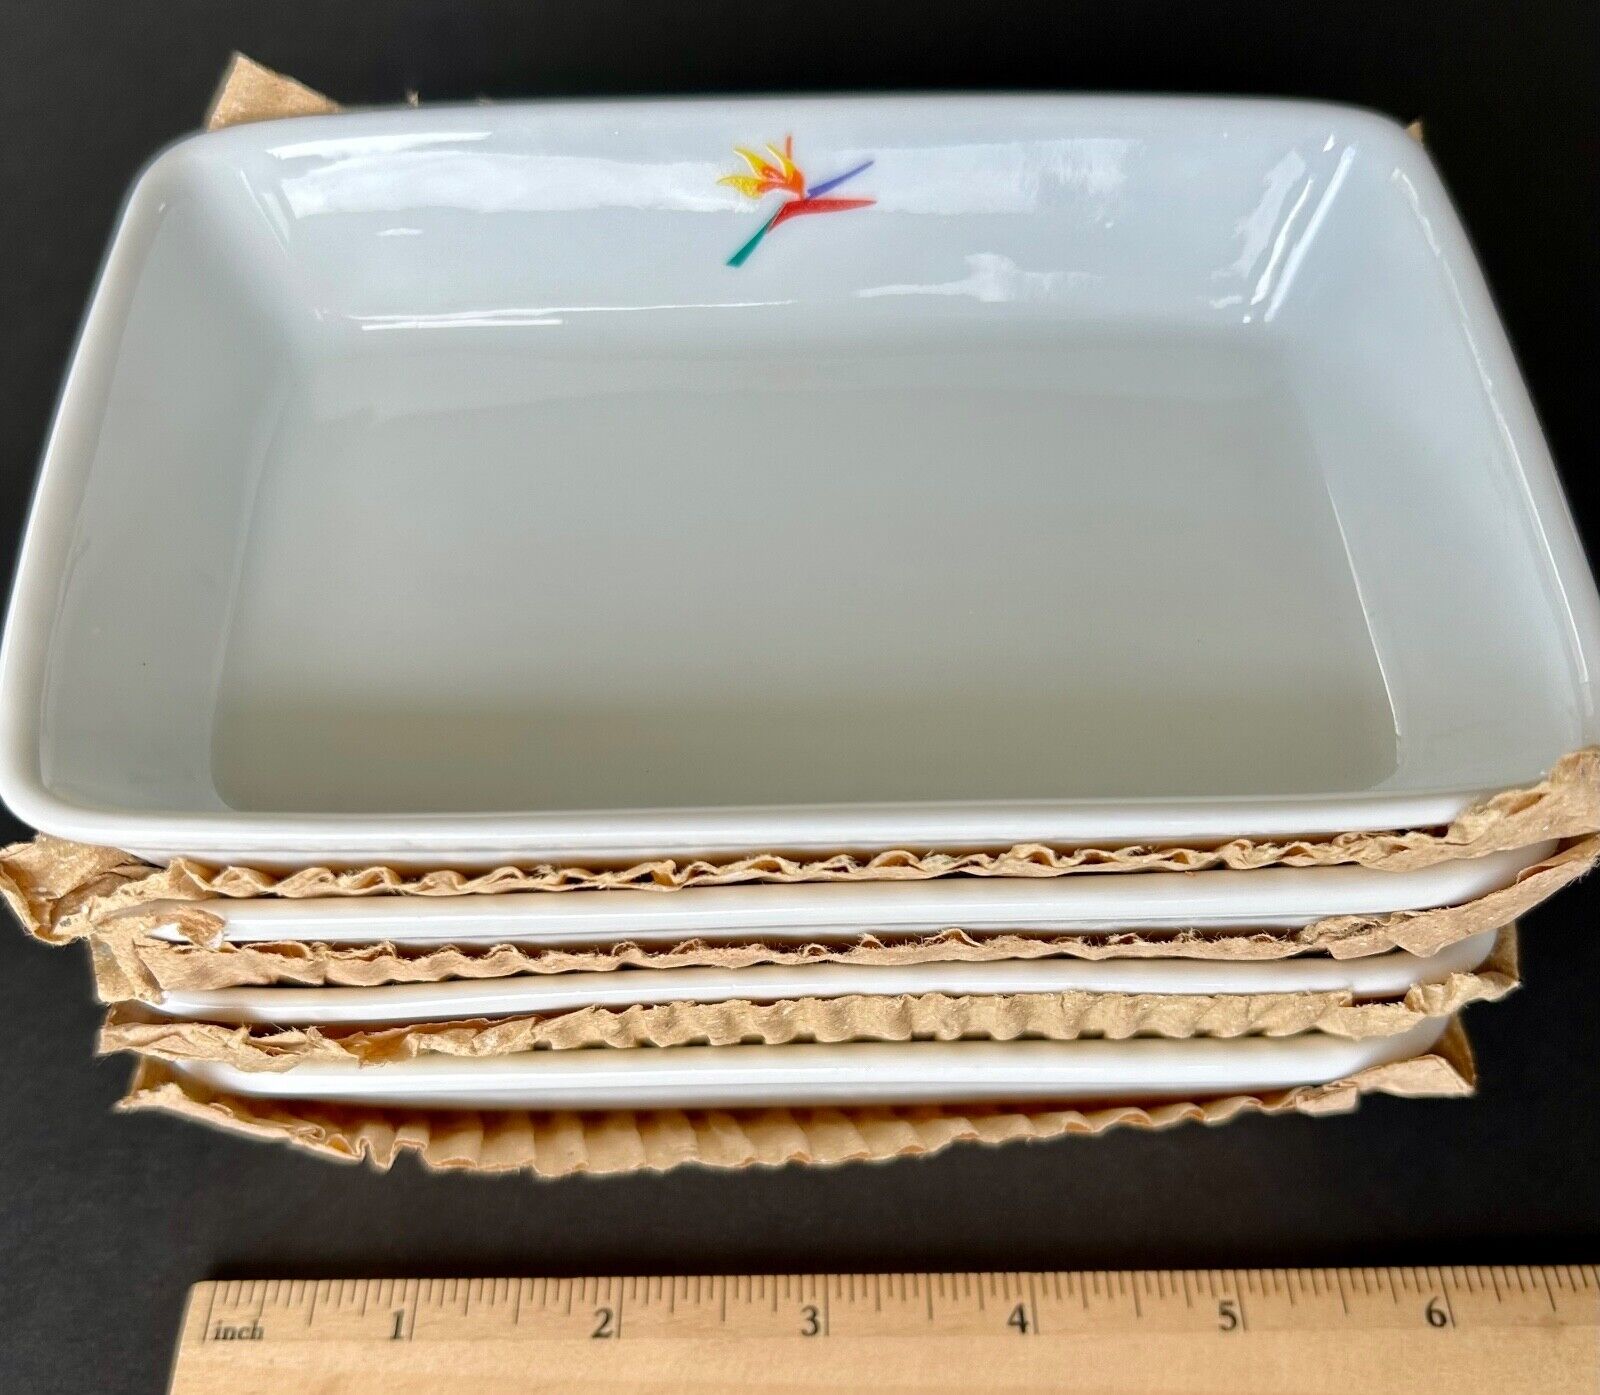 FS Aloha Airlines lot 4 Serving Plates 6x4 casserole collector china dish flower